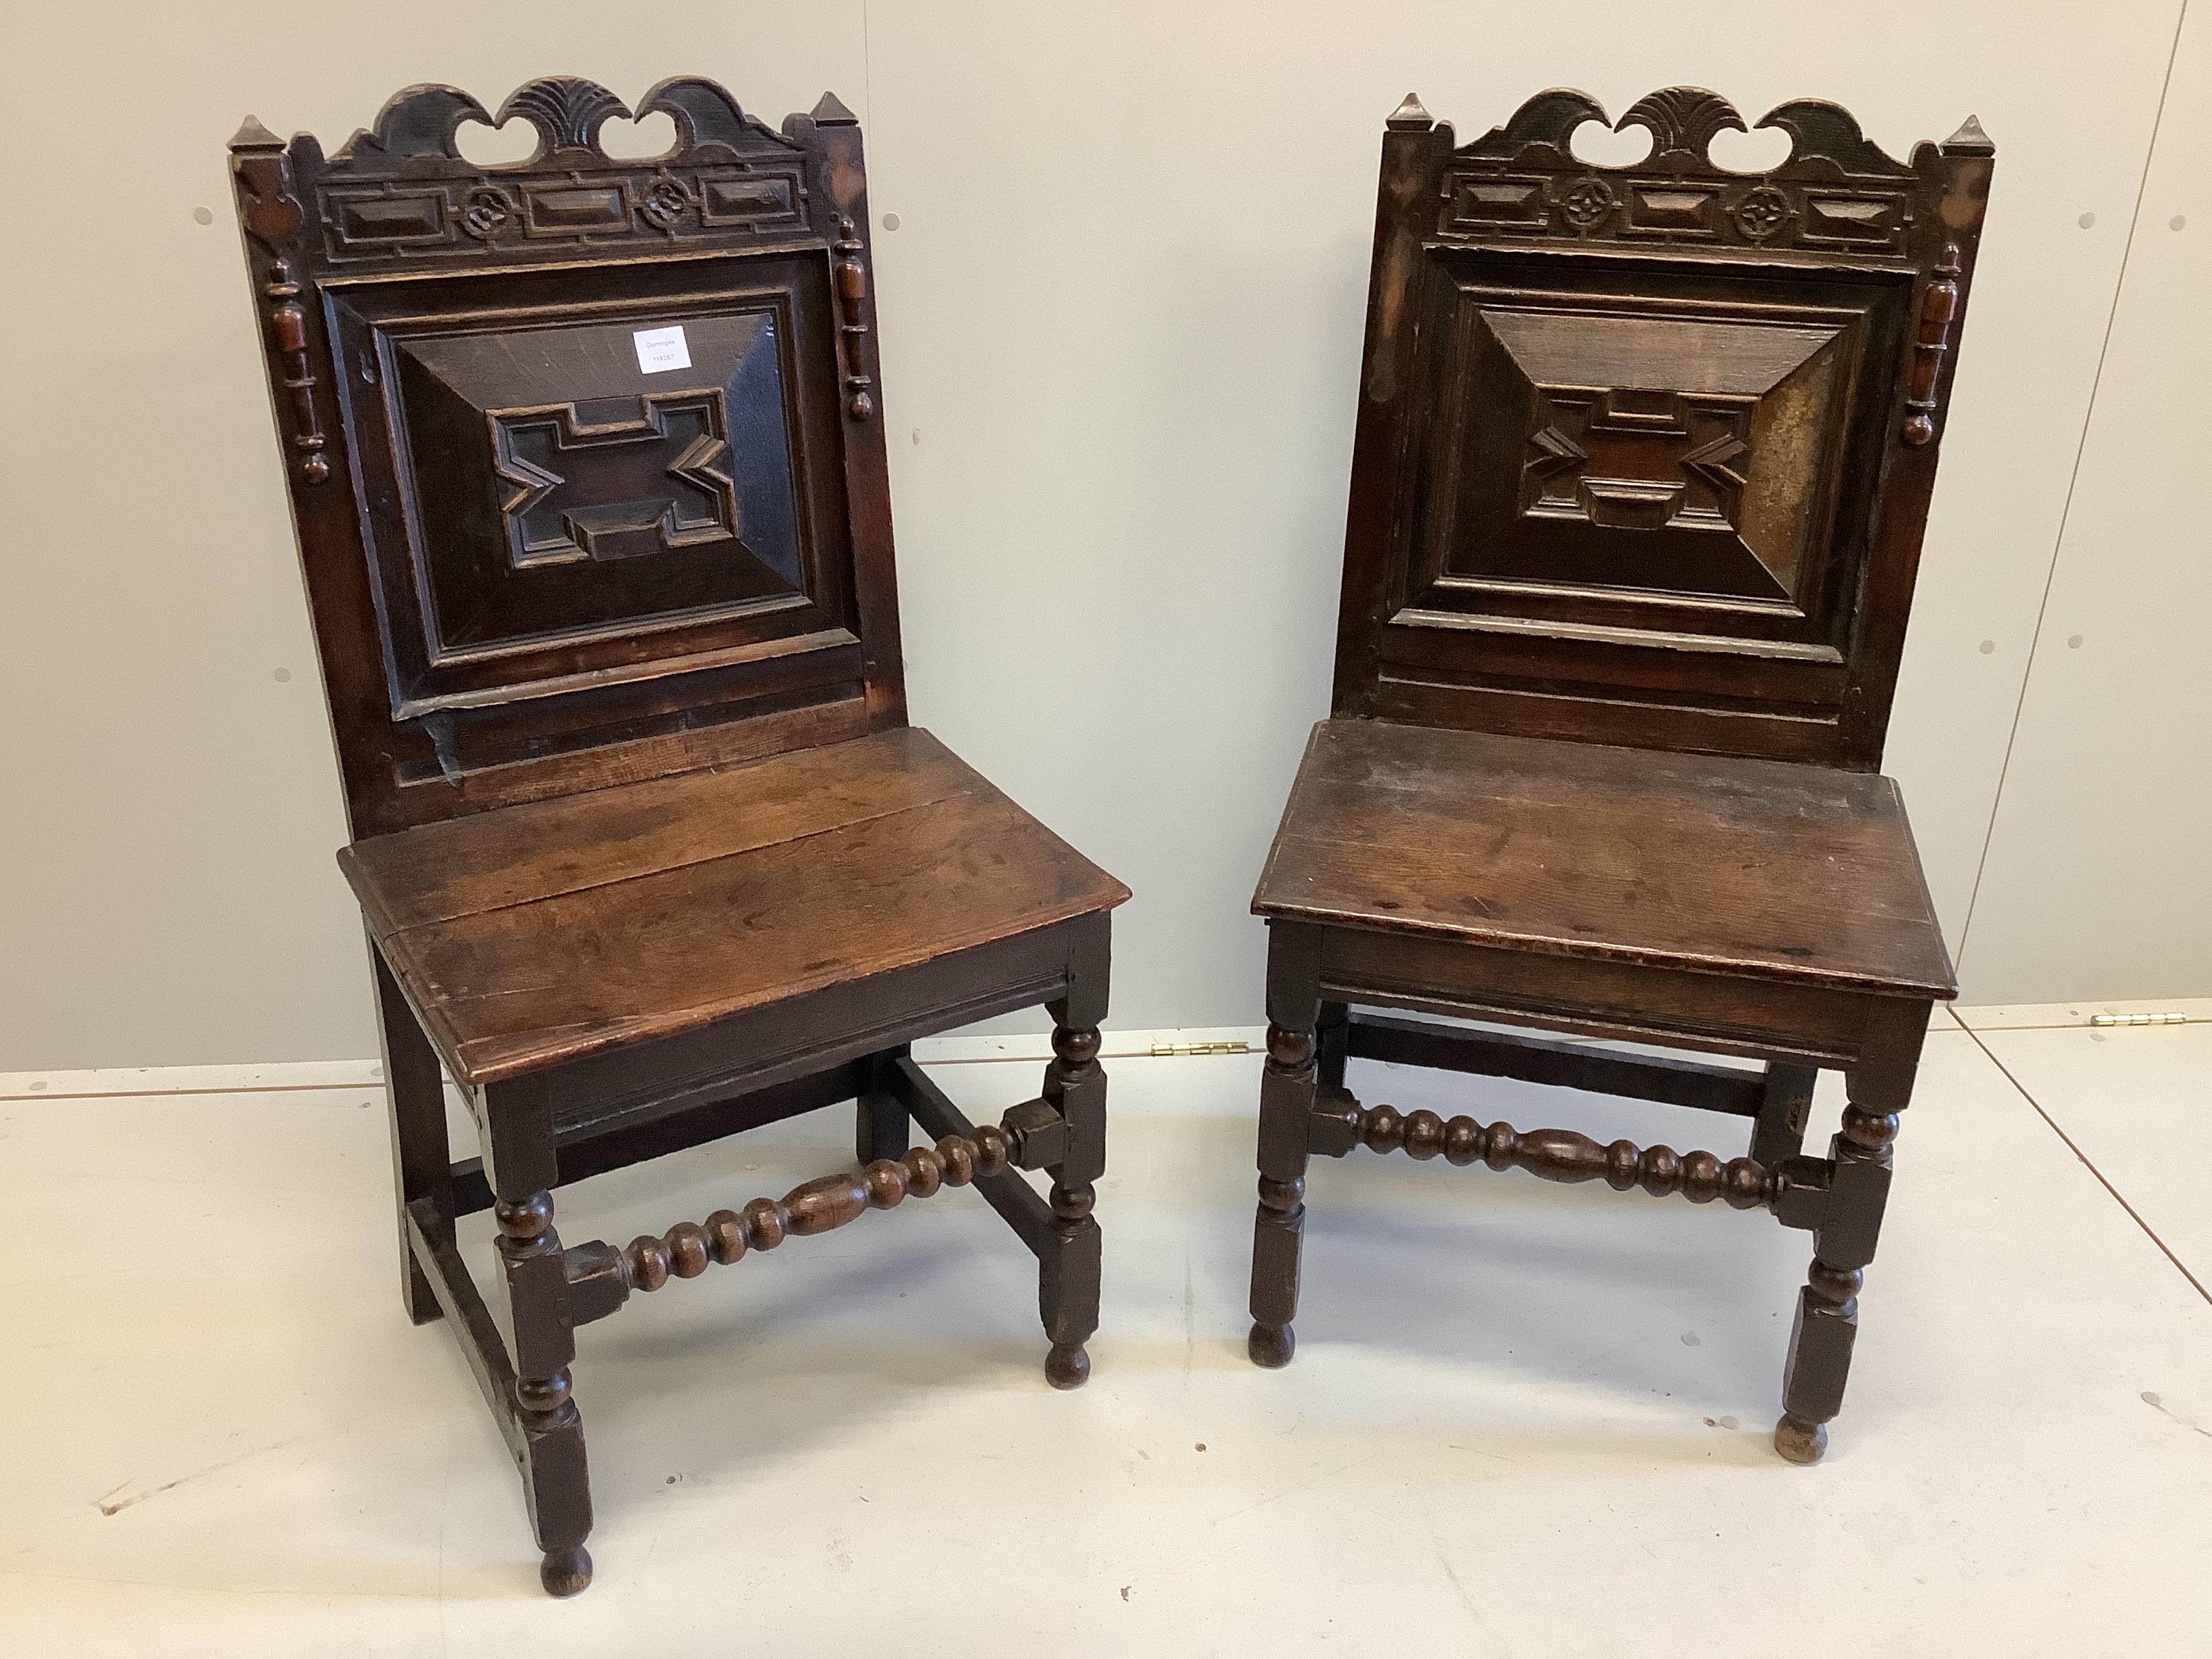 A pair of late 17th century oak wood seat chairs with moulded panelled backs, width 51cm, depth 42cm, height 101cm (one a.f.)